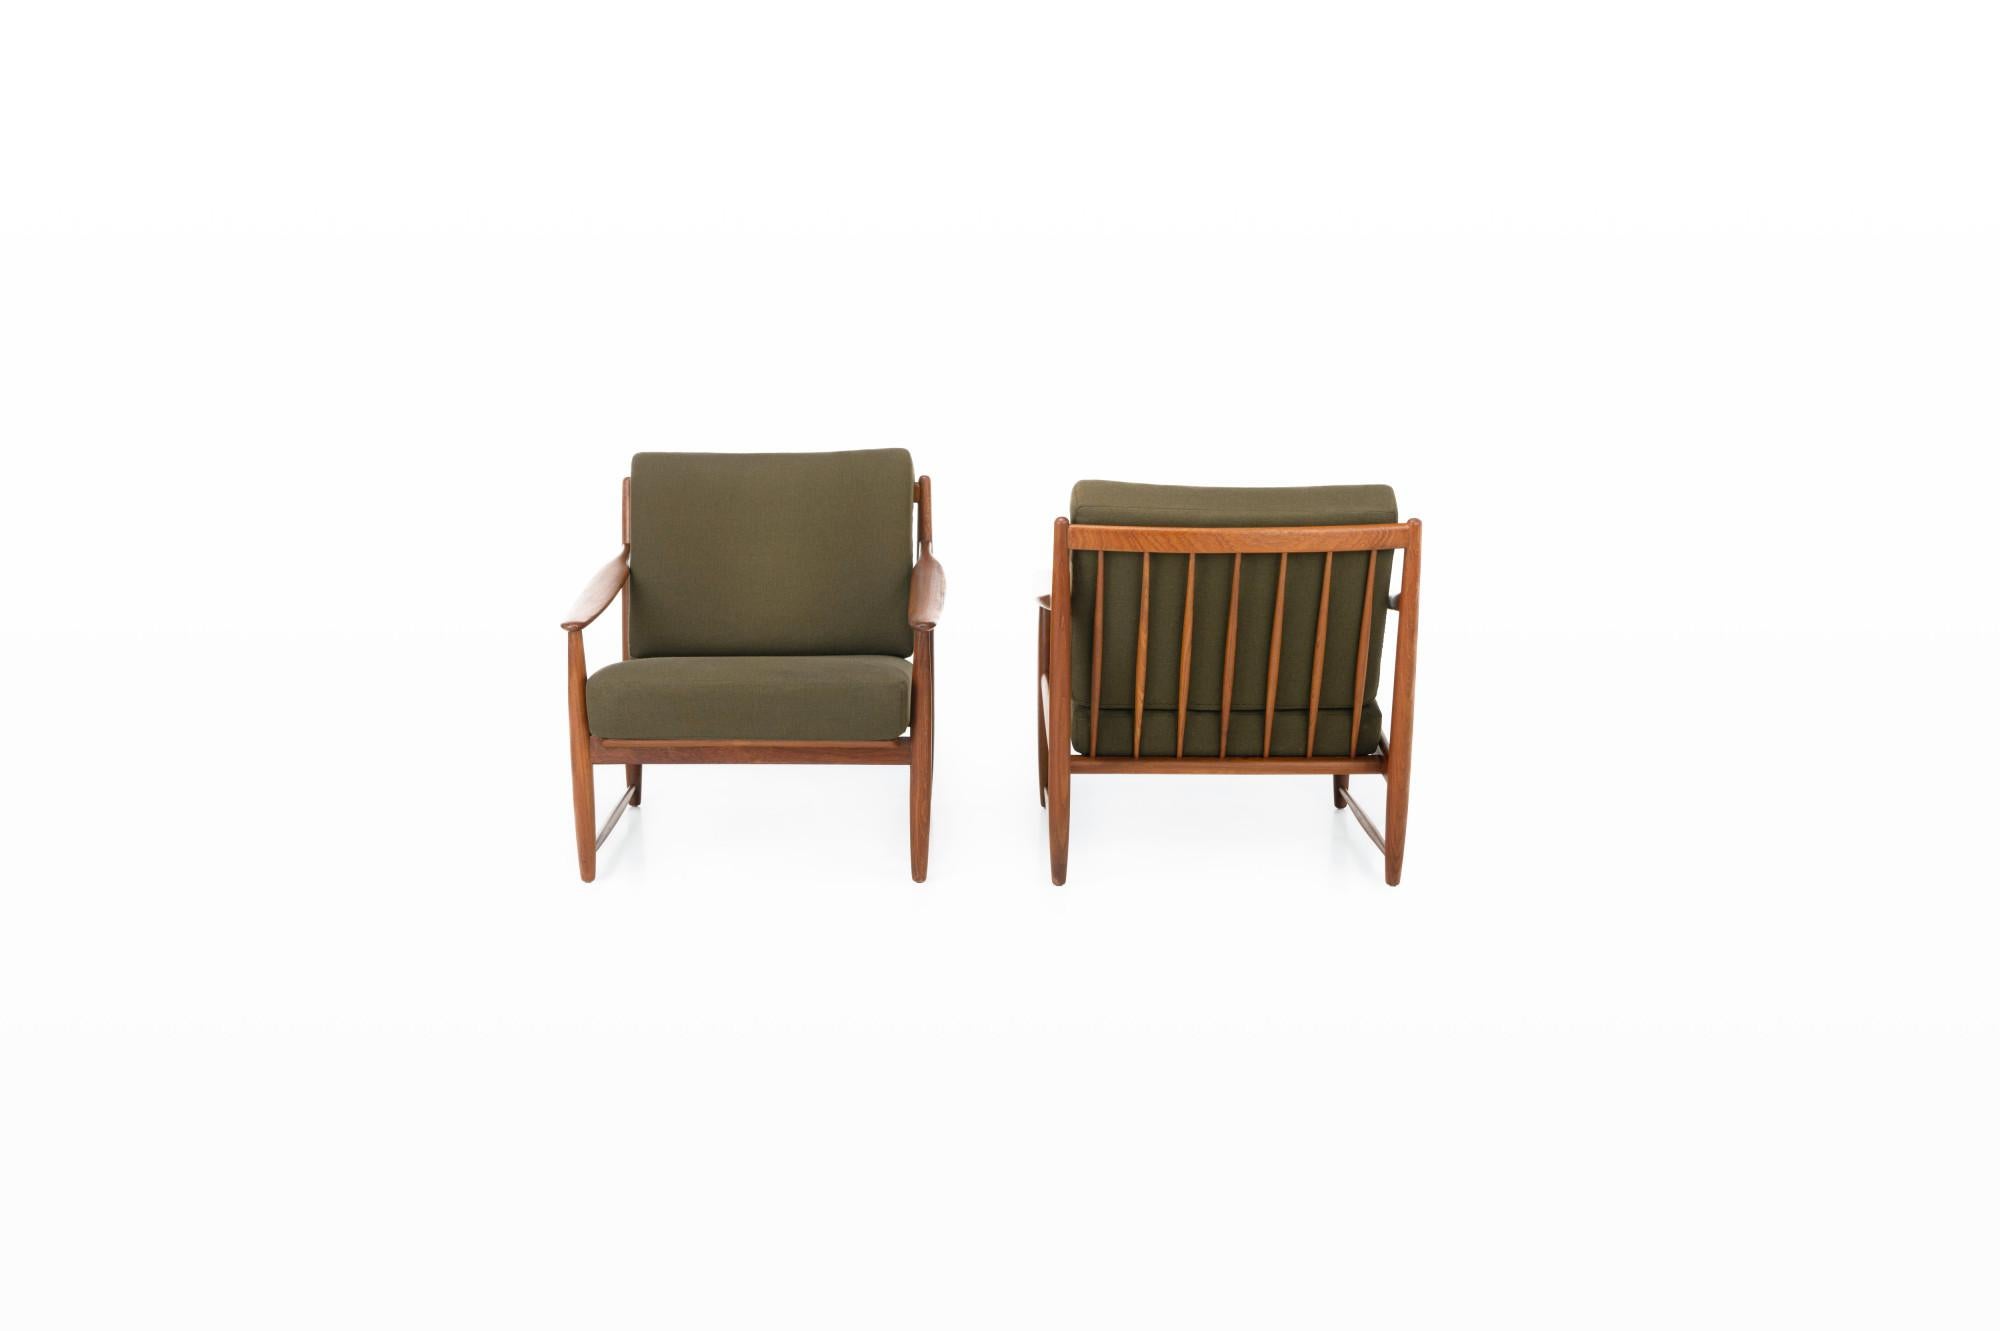 Set of two easy chairs produced in Denmark in the 1960s. The armchairs have a teak frame and the cushions still have the original khaki green fabric.